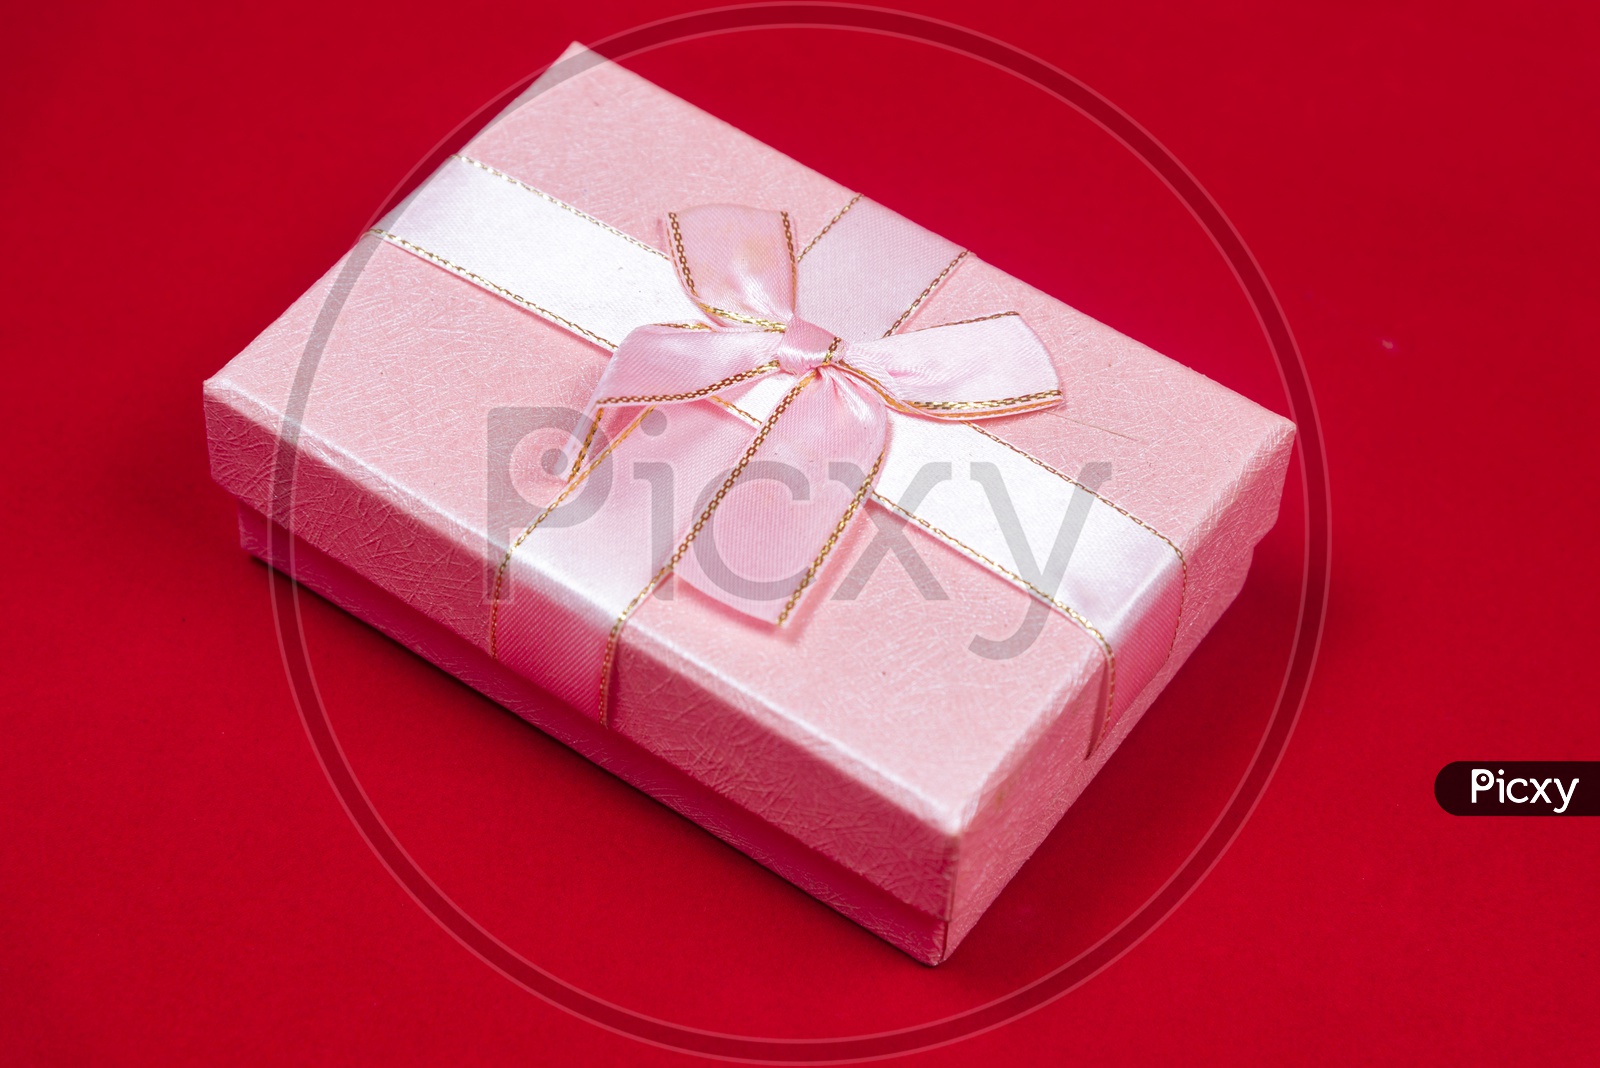 A pink gift box on a red background - Art picture background of Love